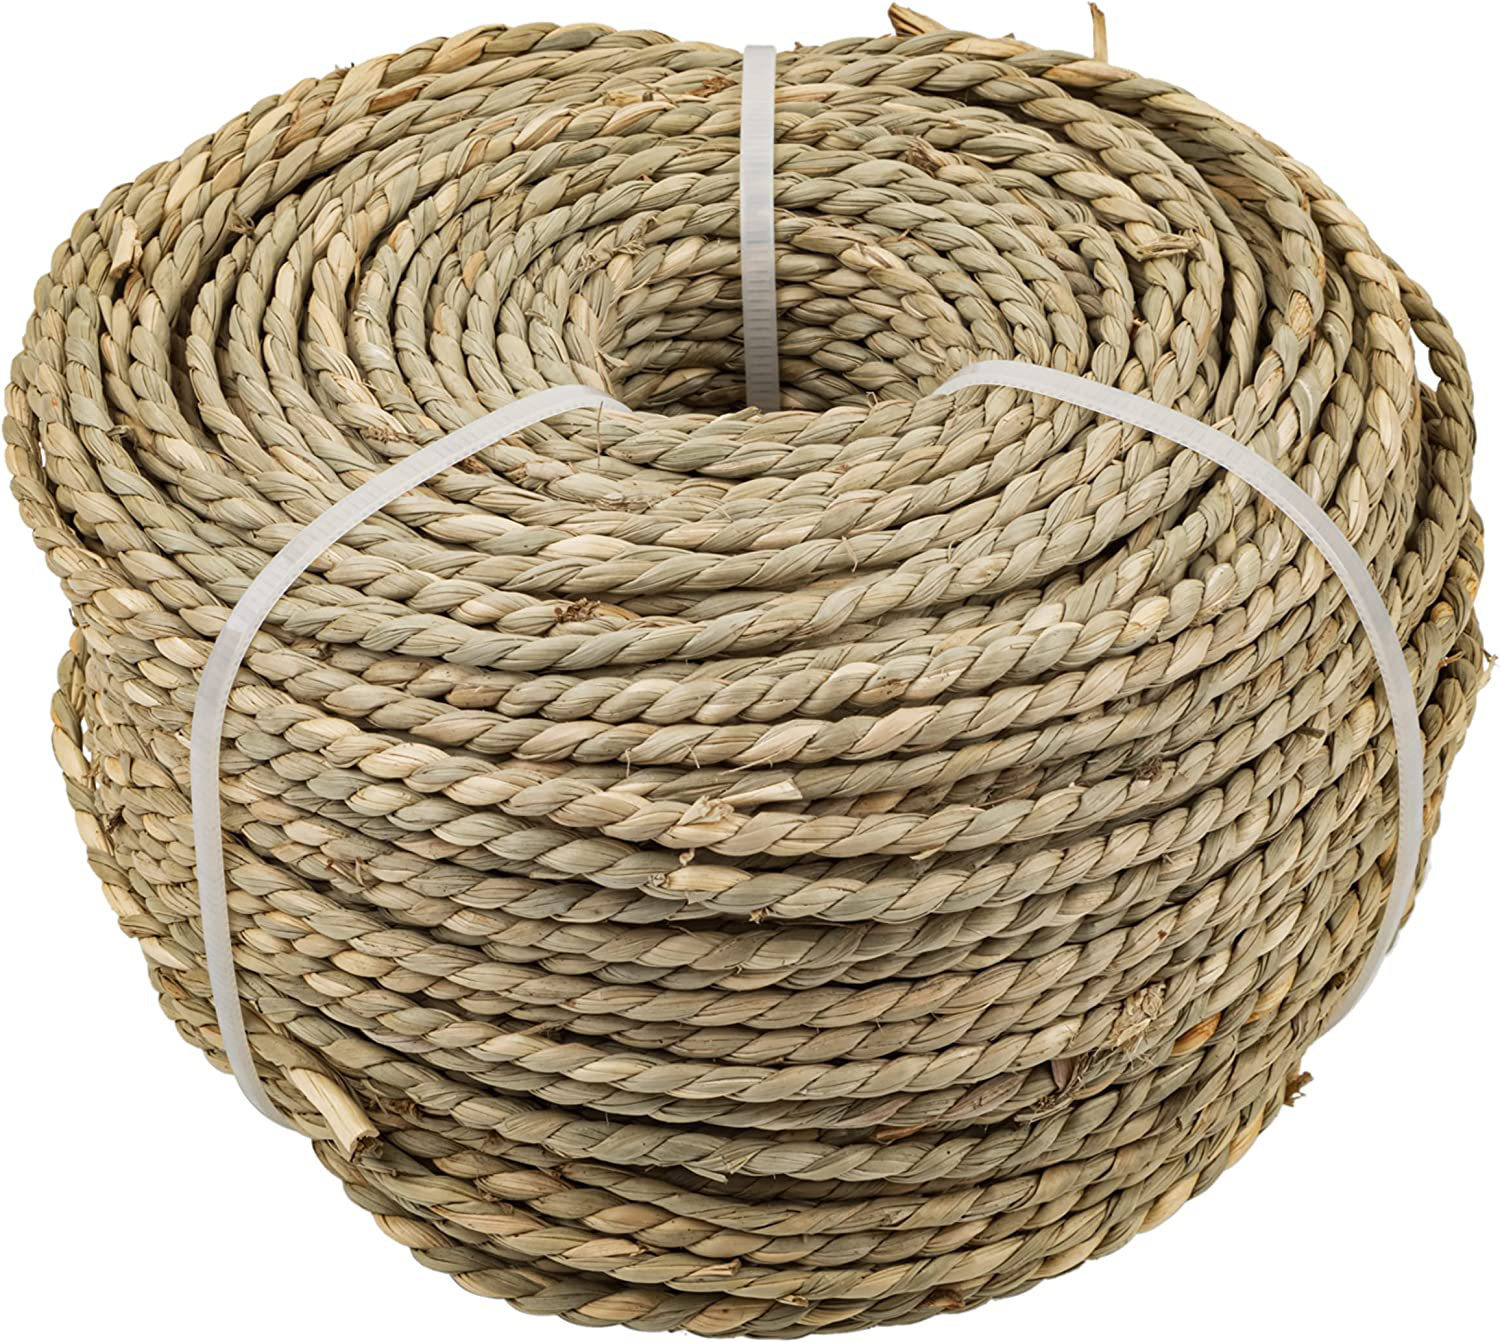 Twisted Seagrass Rope | 1 Pound Coil | Rattan Reed for Basket Weaving and  Wicker Furniture Making